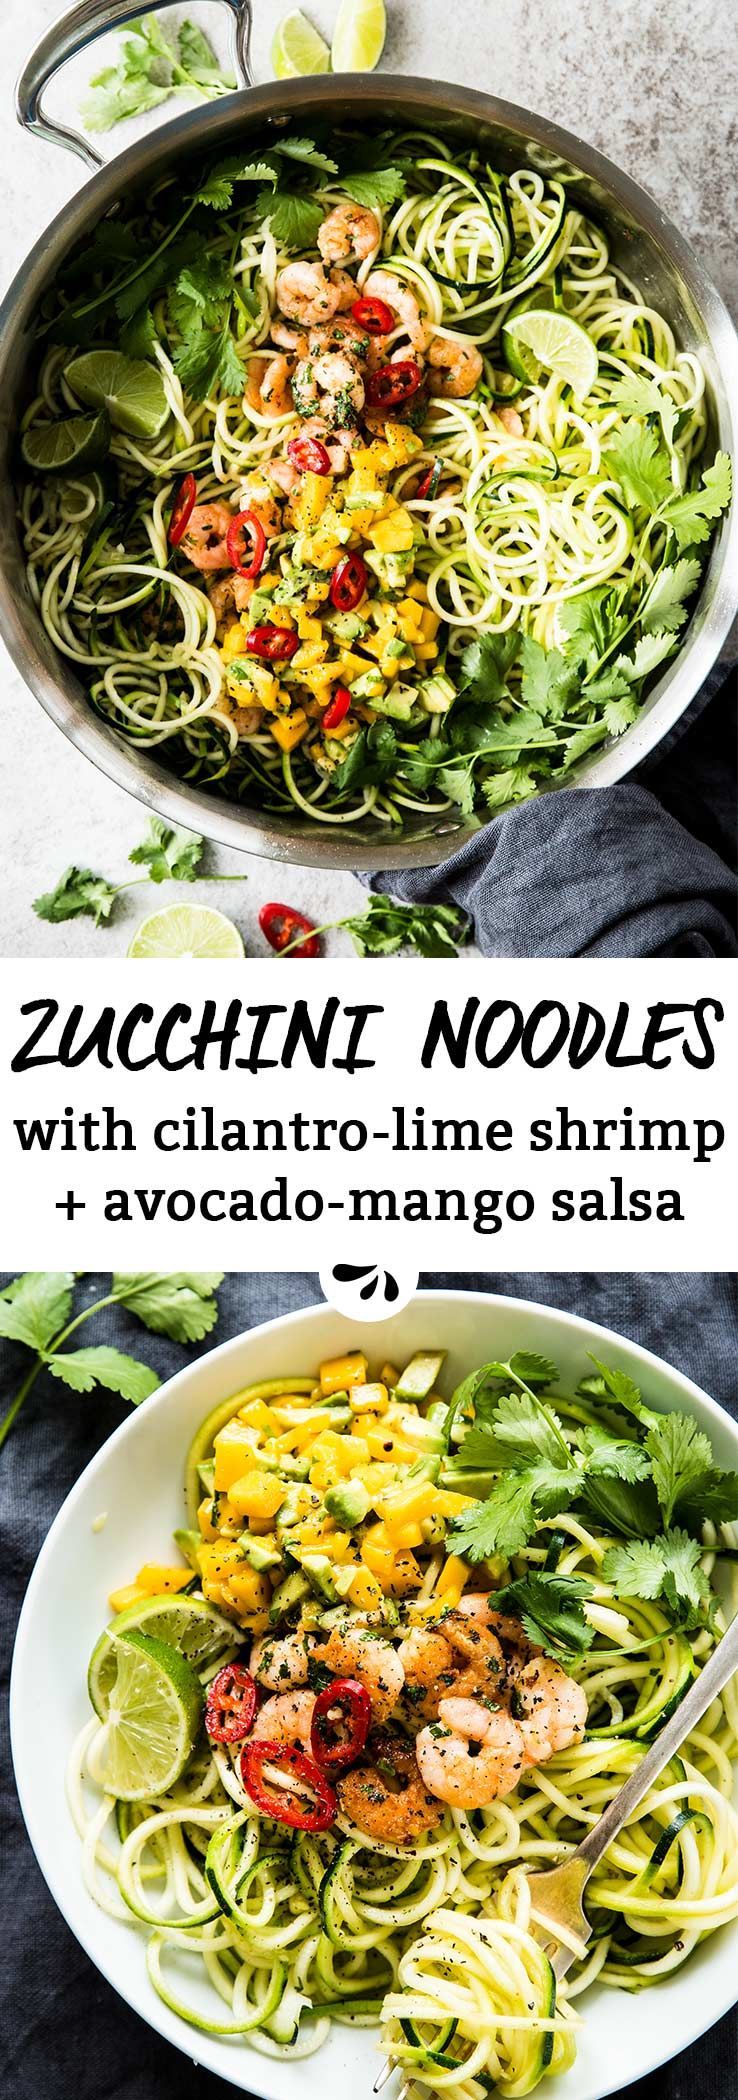 Are you looking for healthy recipes that are low carb AND delicious? Then you need these Zucchini Noodles with Cilantro Lime Shrimp and Avocado Mango Salsa! Kid-friendly, whole 30 and paleo approved, these are a quick and easy healthy dinner recipe you'll want to make again and again. The Mexican inspired flavors go so well with the zucchini spaghetti and the shrimp scampi will become a new favorite. Let's zoodle! -   21 noodle recipes for kids
 ideas